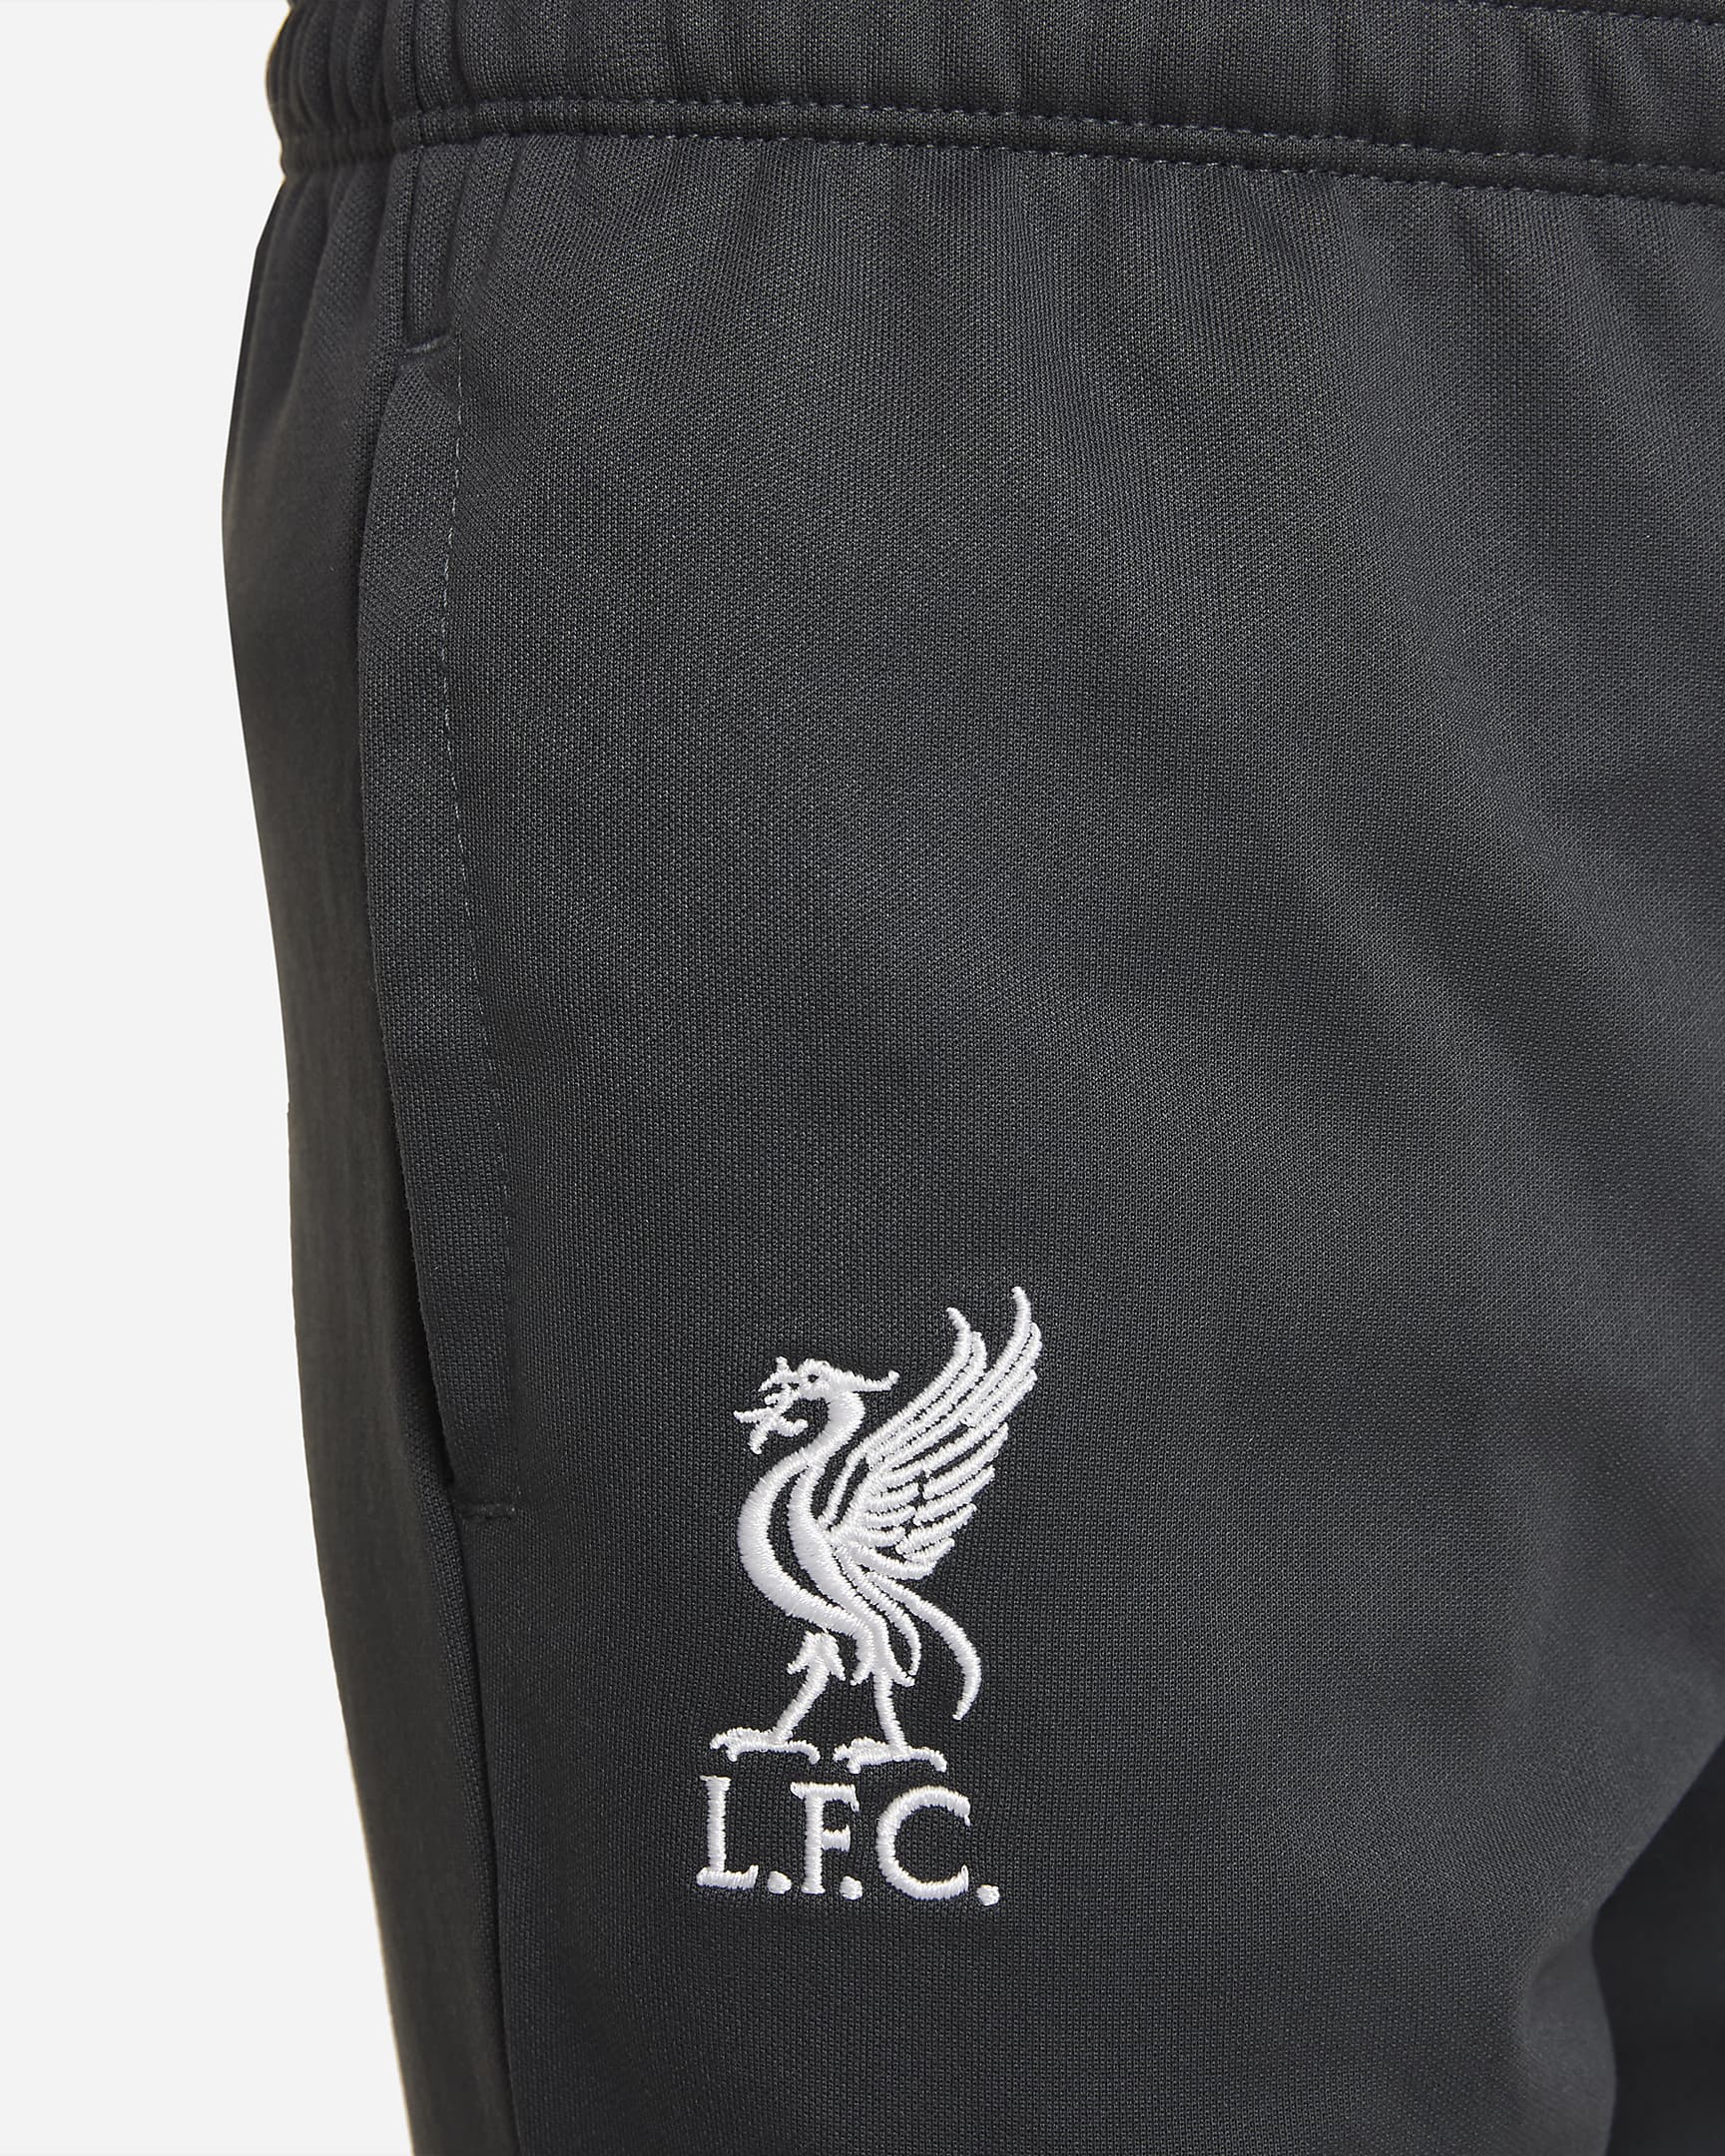 Liverpool F.C. Academy Pro Younger Kids' Nike Dri-FIT Football Pants ...